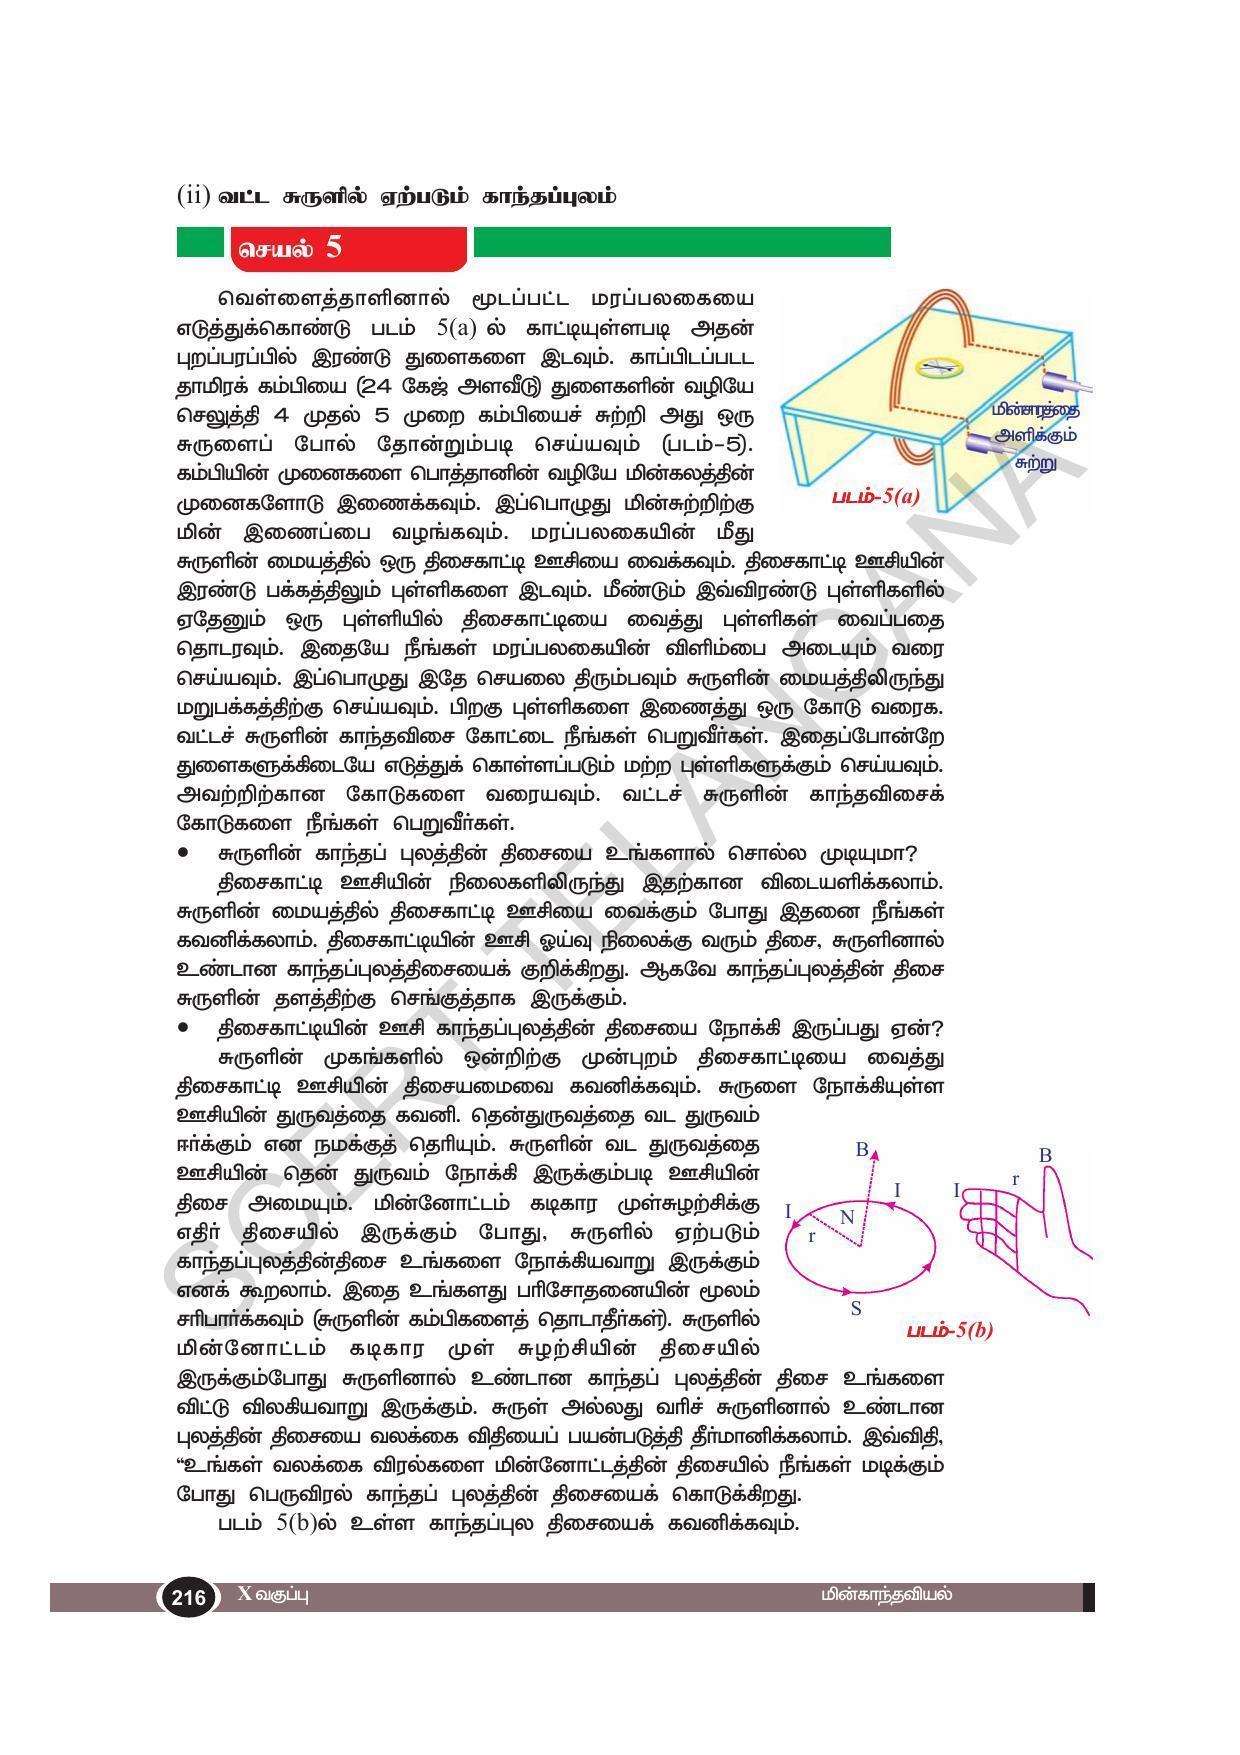 TS SCERT Class 10 Physical Science(Tamil Medium) Text Book - Page 228